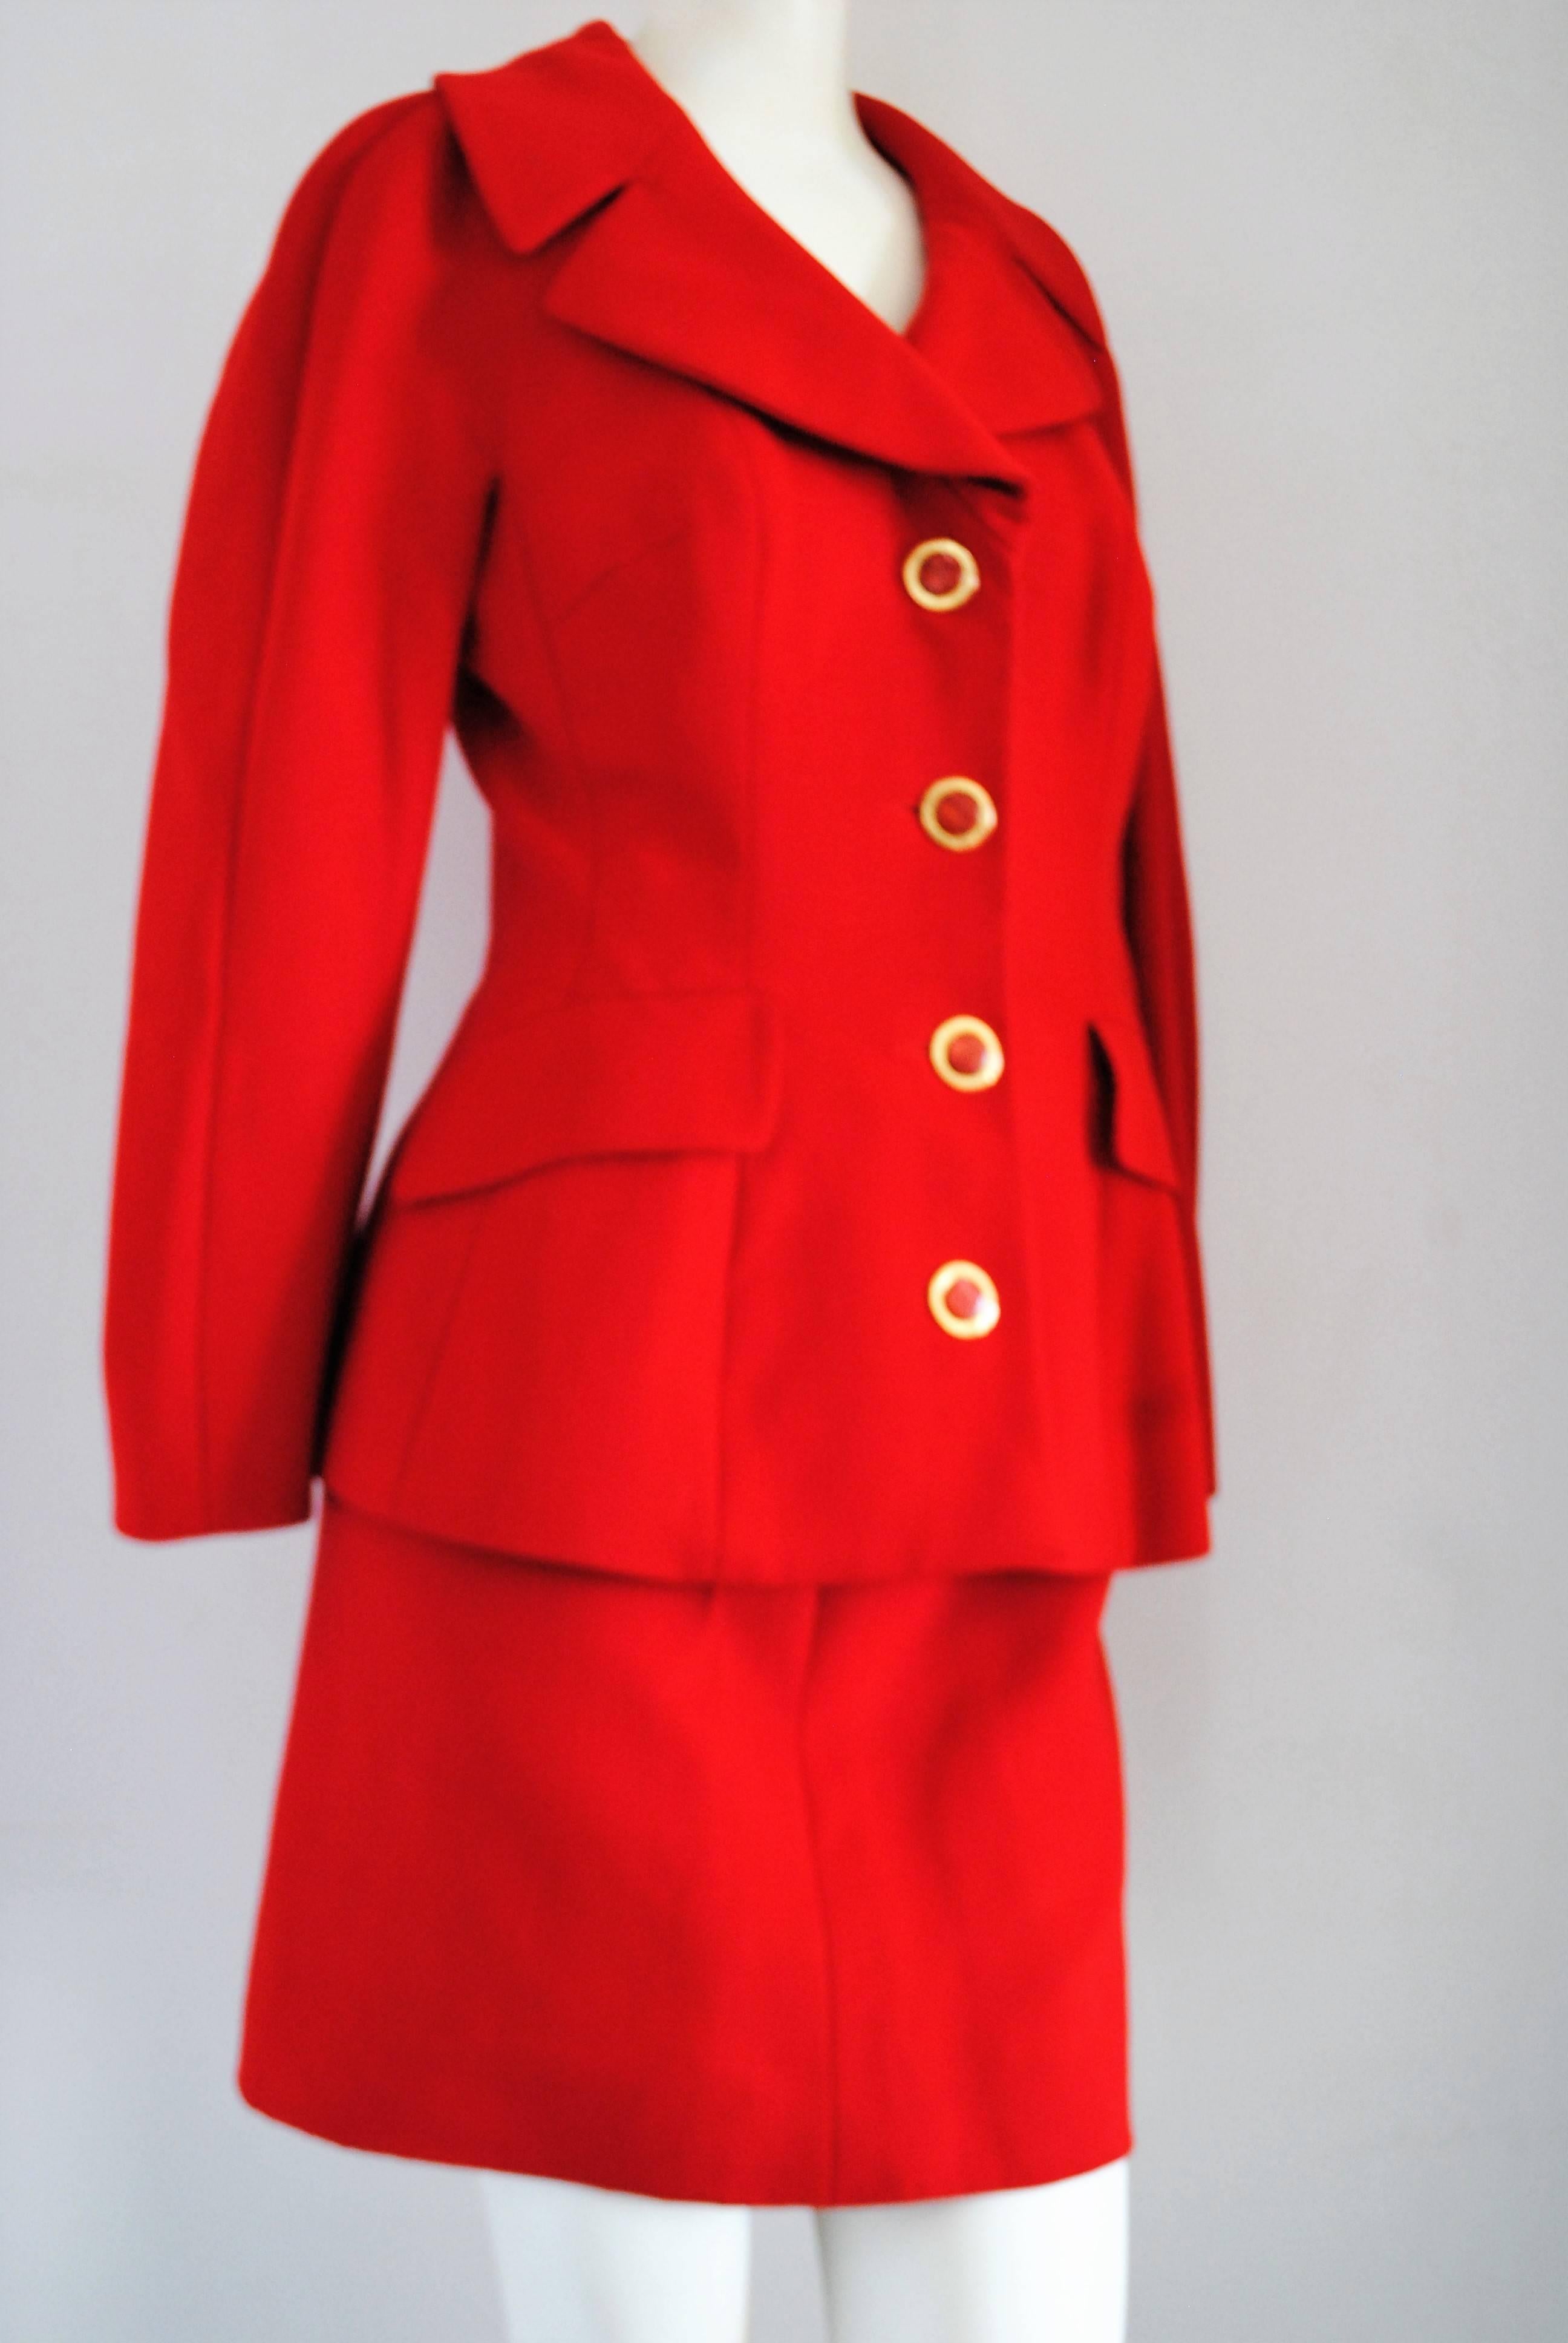 Dolce & Gabbana Red skirt suit
Totally made in italy in size 38